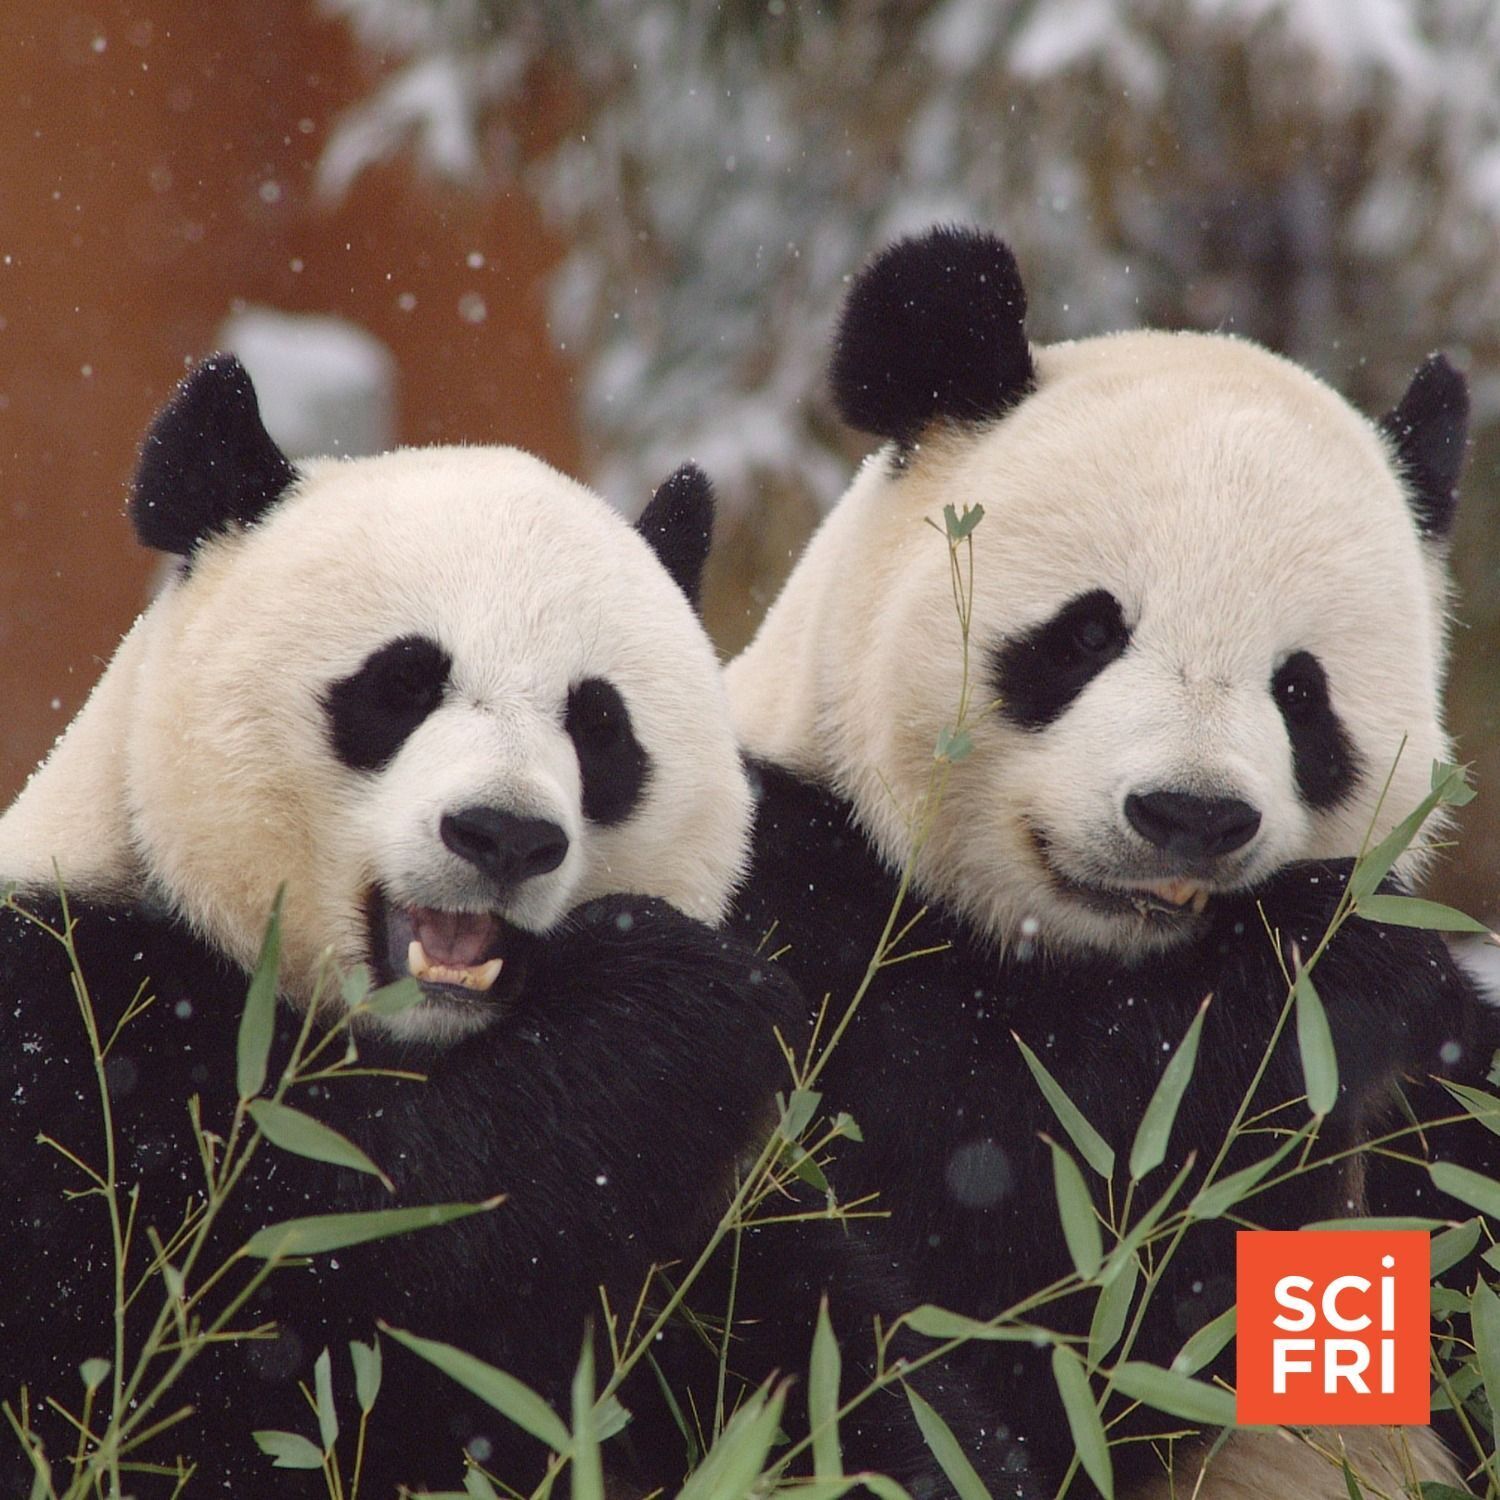 672: How 'Panda Diplomacy' Led To Conservation Success